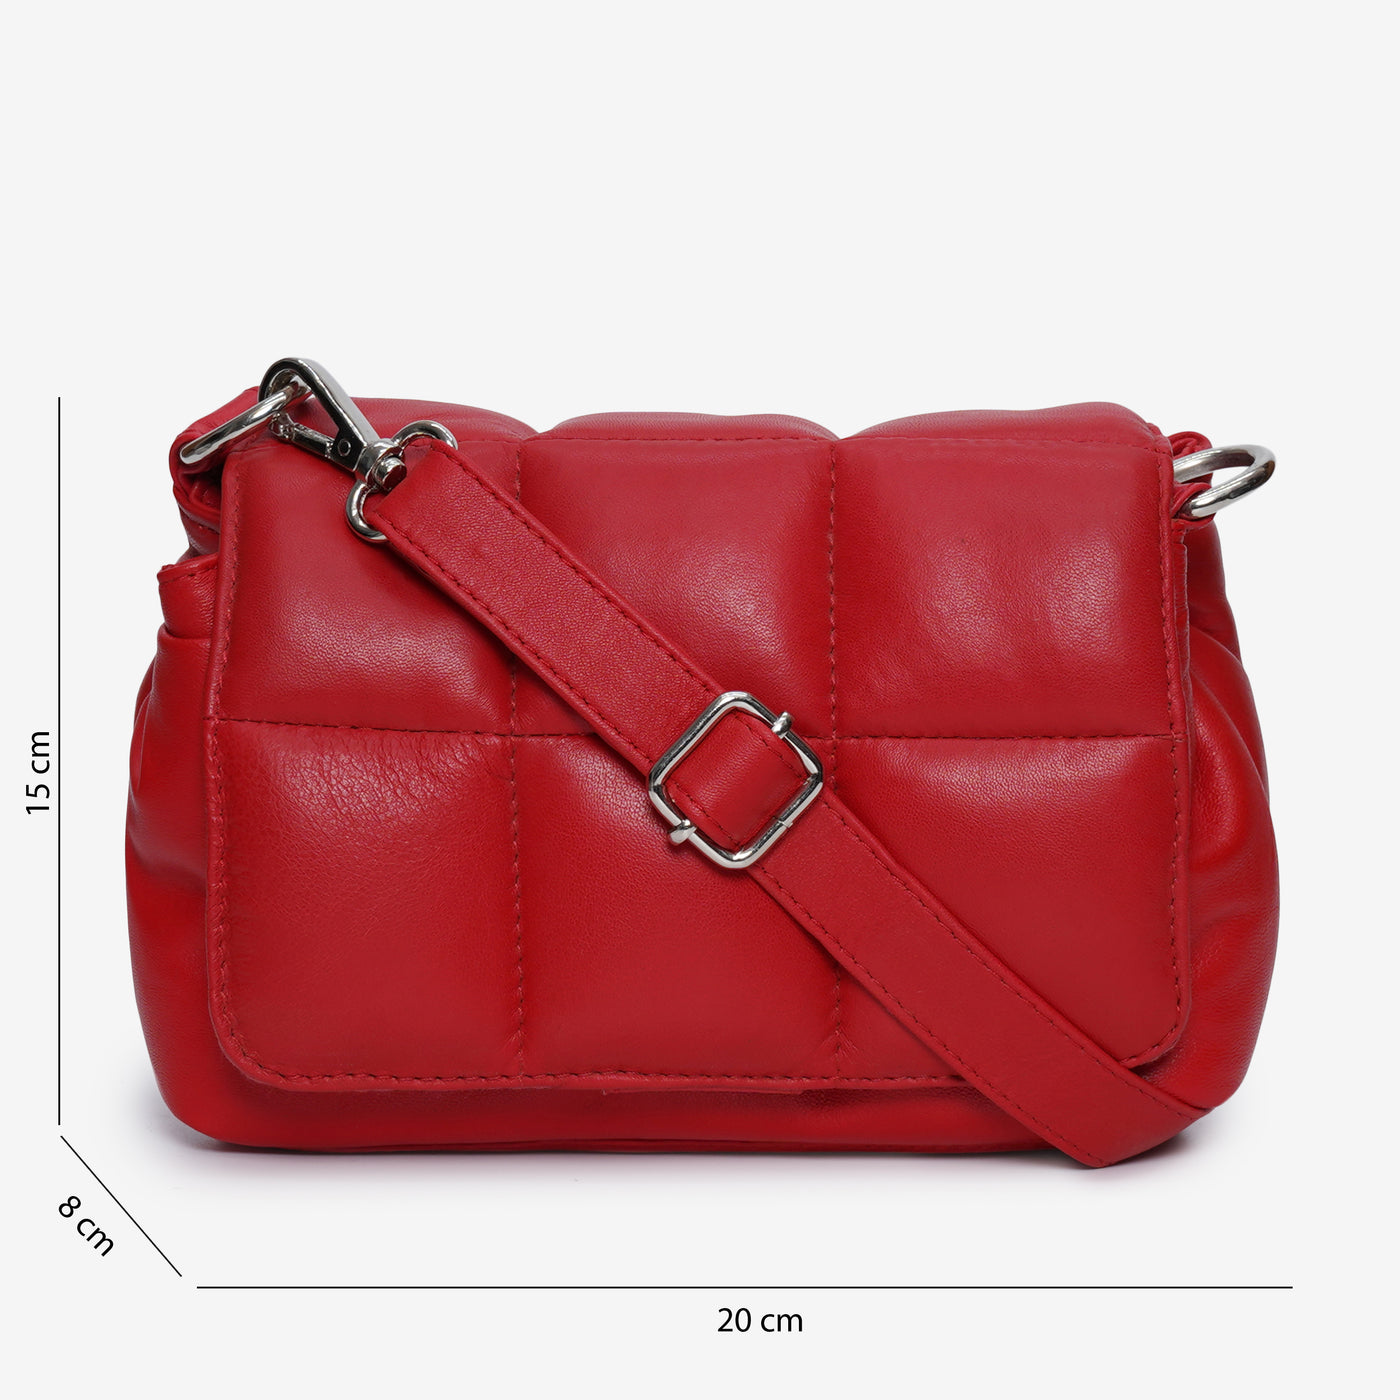 Red Genuine Leather Cross-body Bag for Women